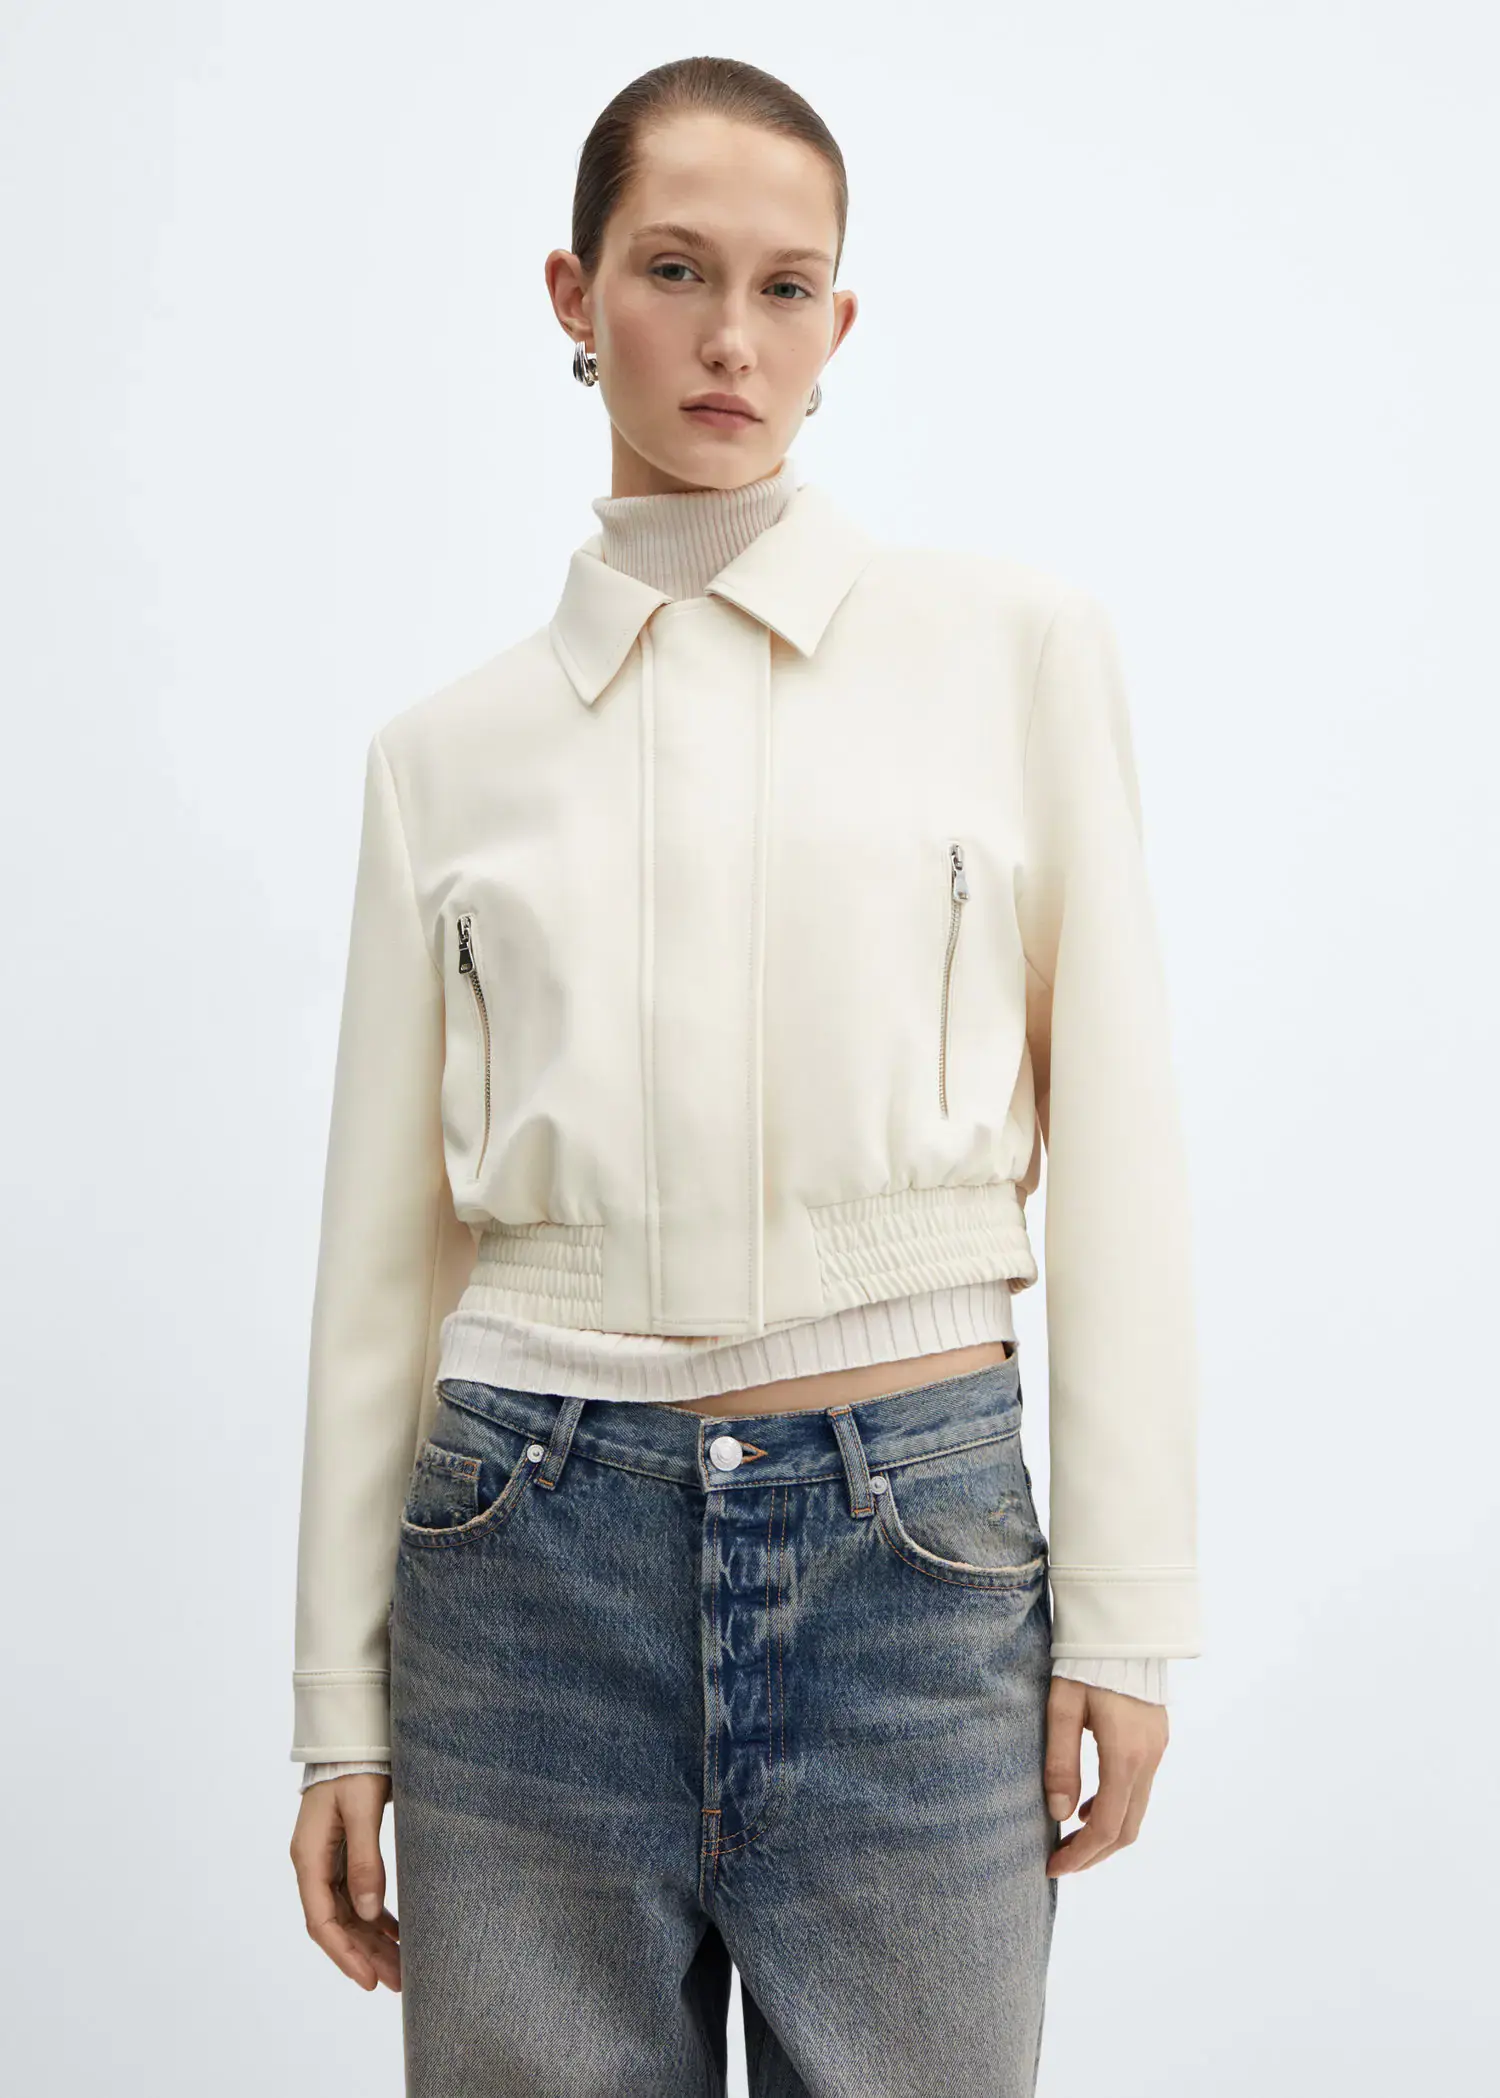 Mango Cropped jacket with shoulder pads. 1